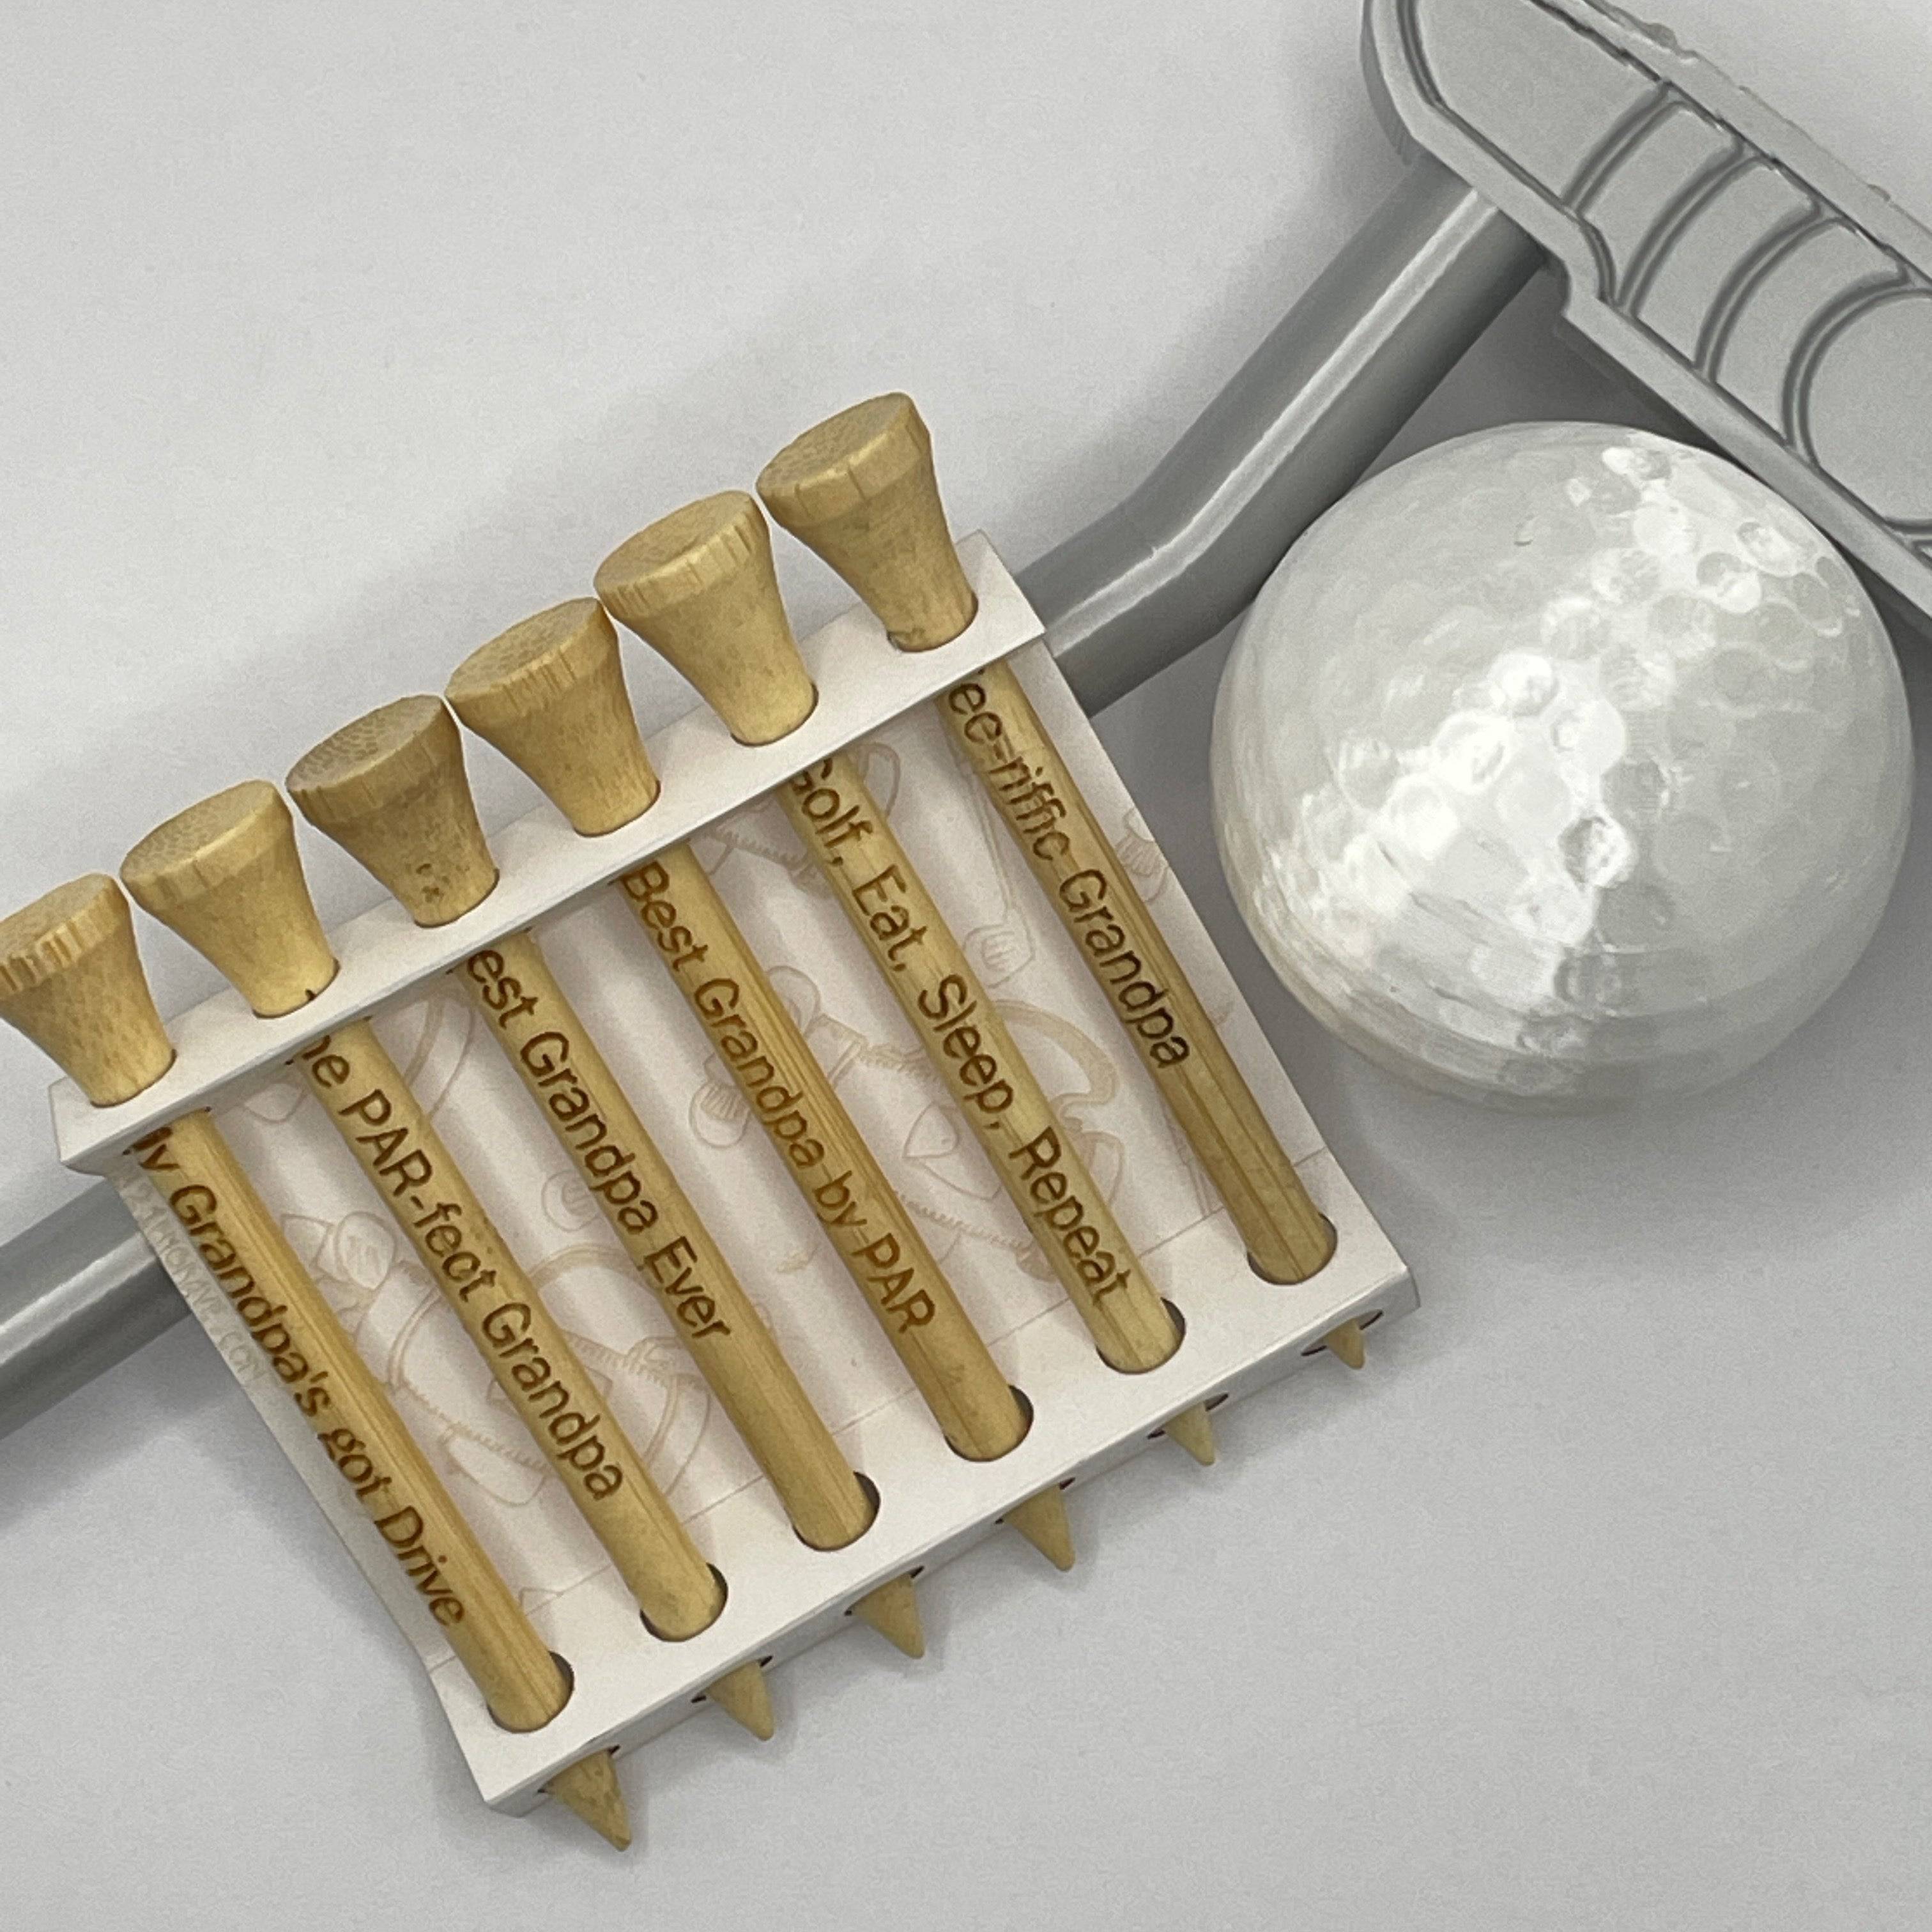 Golf Gift for Dad Golf Tee Set features golf-inspired dad golf sayings and puns.